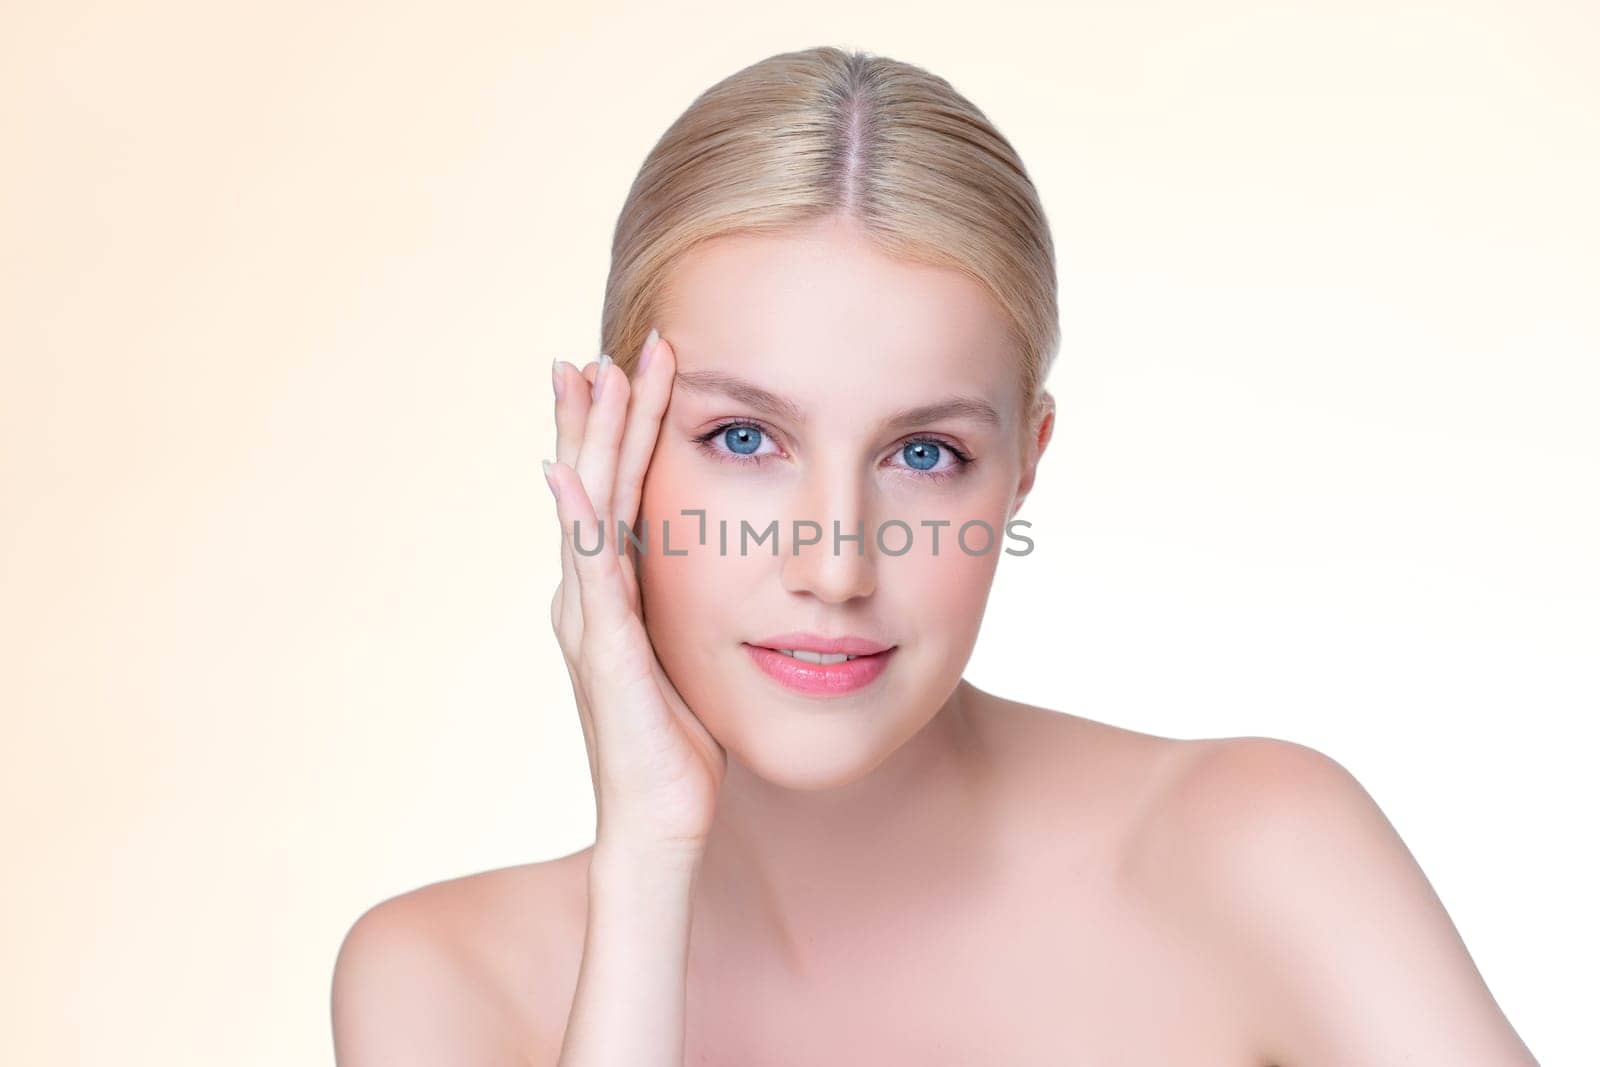 Personable beautiful woman portrait with perfect smooth clean skin and natural makeup portrait in isolated background. Hand gesture with expressive facial expression for beauty model concept.